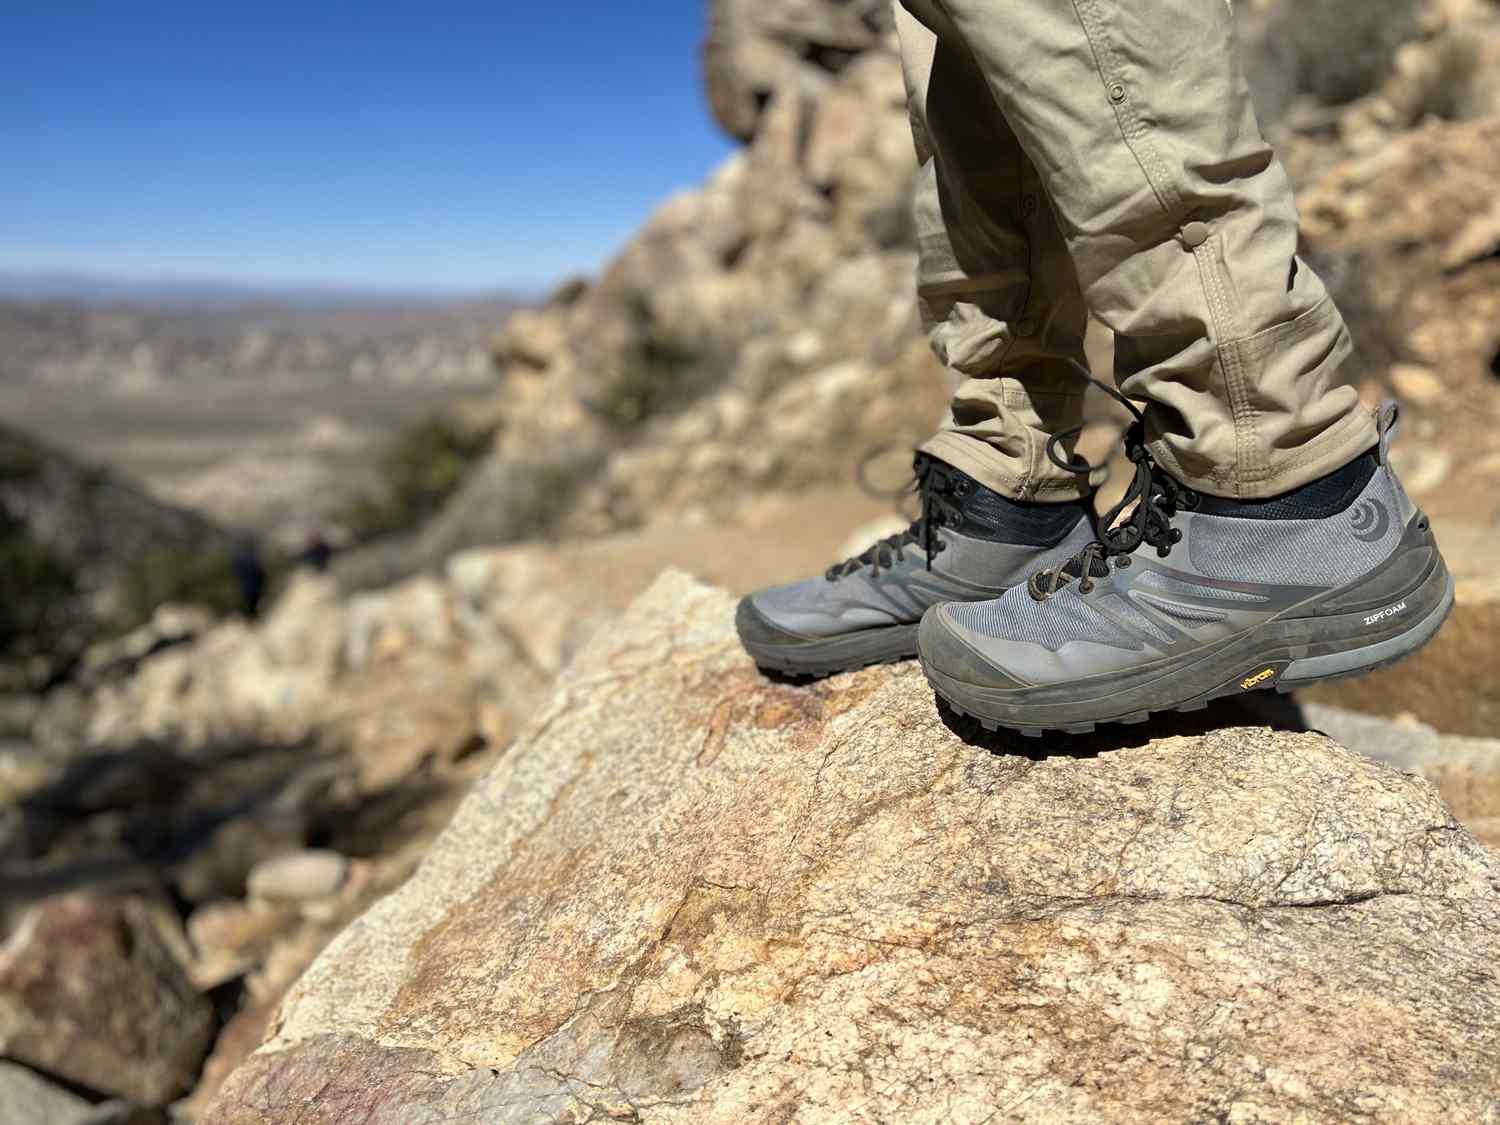 Best Hiking Boots for Rocky Terrain